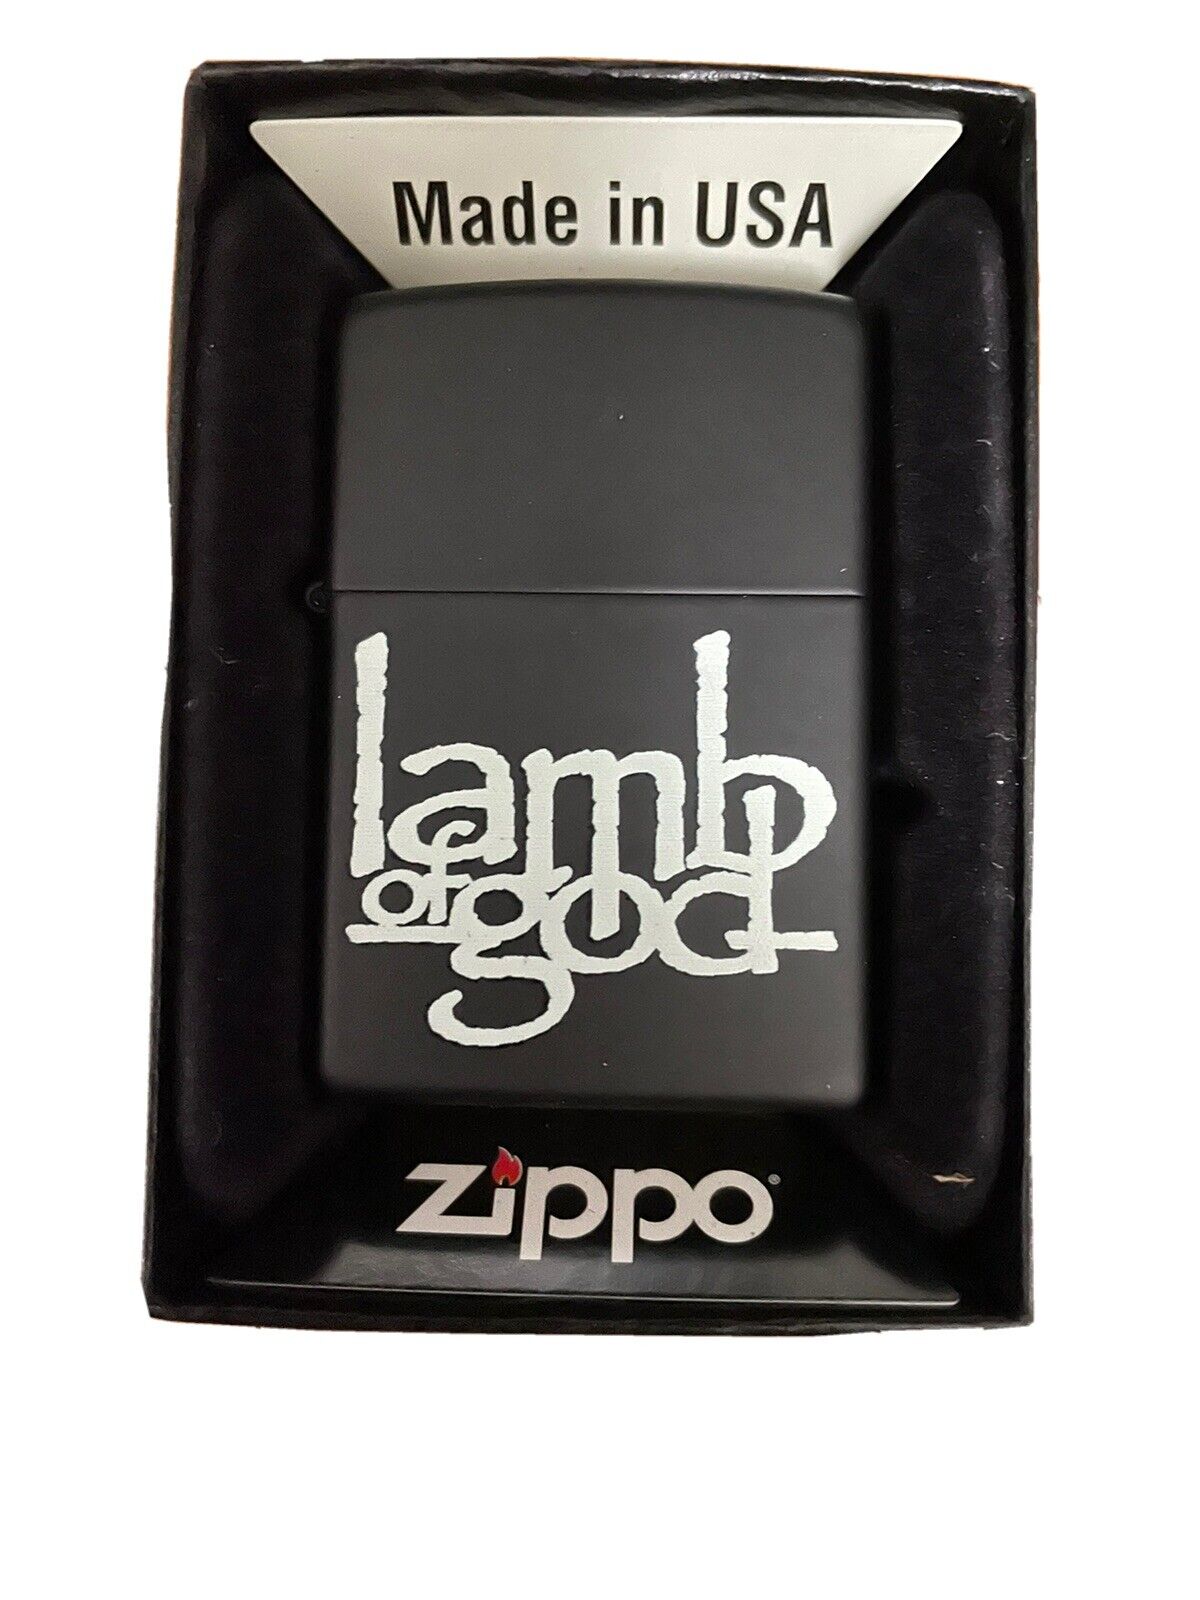 Rare Lamb Of God Limited Edition 2012 Zippo Lighter Brand New In Box. 100% 🔥